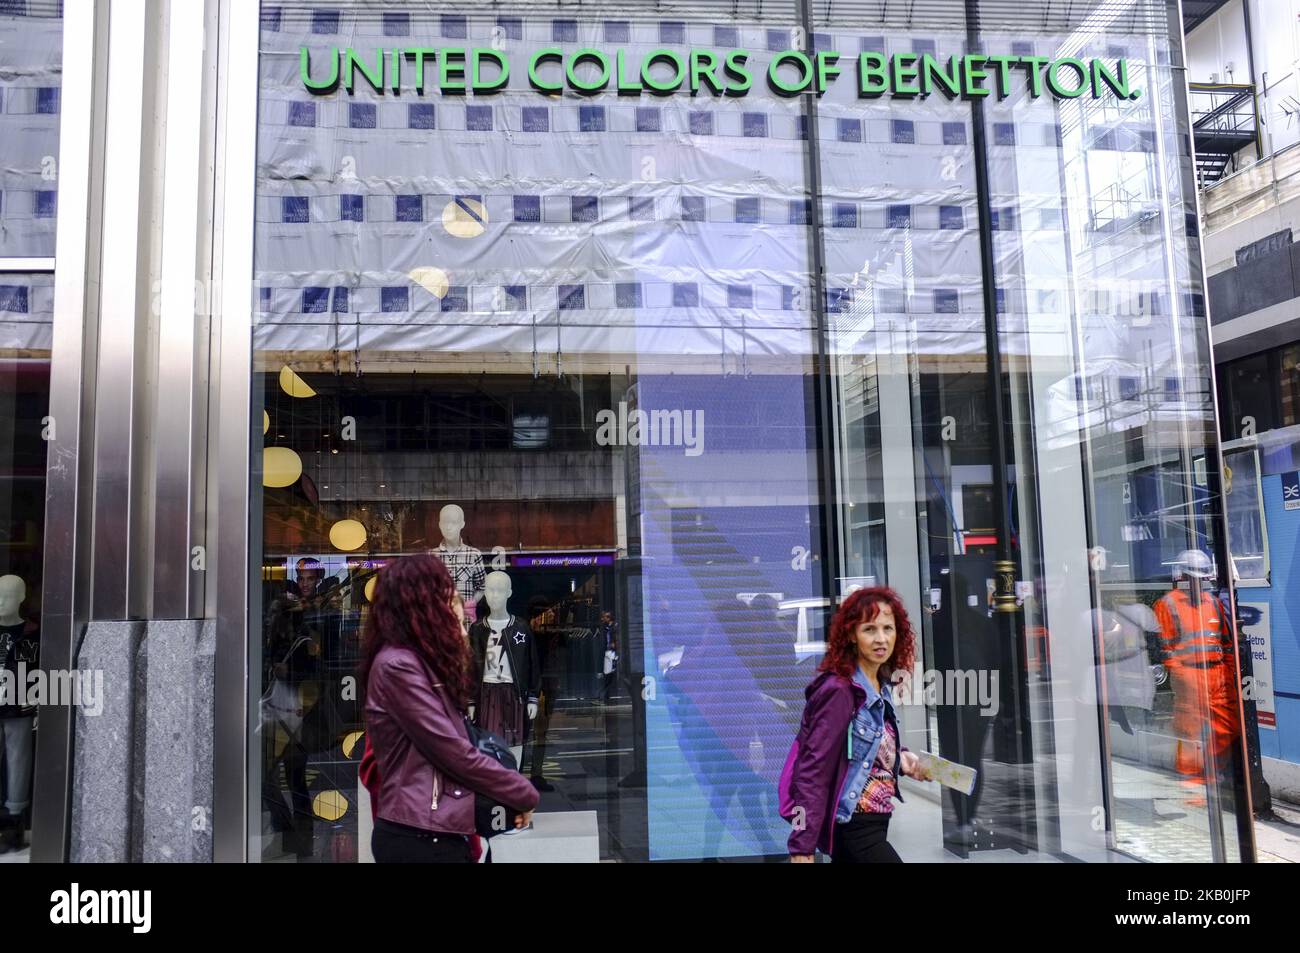 A United Colors Of Benetton store is pictured in central London on August 29, 2018. Following the collapse of Morandi Bridge in Genoa, which costed the life to 41 people, Italy's Deputy Prime Minister Matteo Salvini signaled support for a political compromise taking shape following last week's Genoa bridge collapse, saying he favored a government ownership role in toll-road operator Autostrade per l'Italia, but opposed nationalizing the highway network. Autostrade is a motorways concession society, part of the Atlantia Group, which owns 88.06% of the share capital and refers, as the main shar Stock Photo